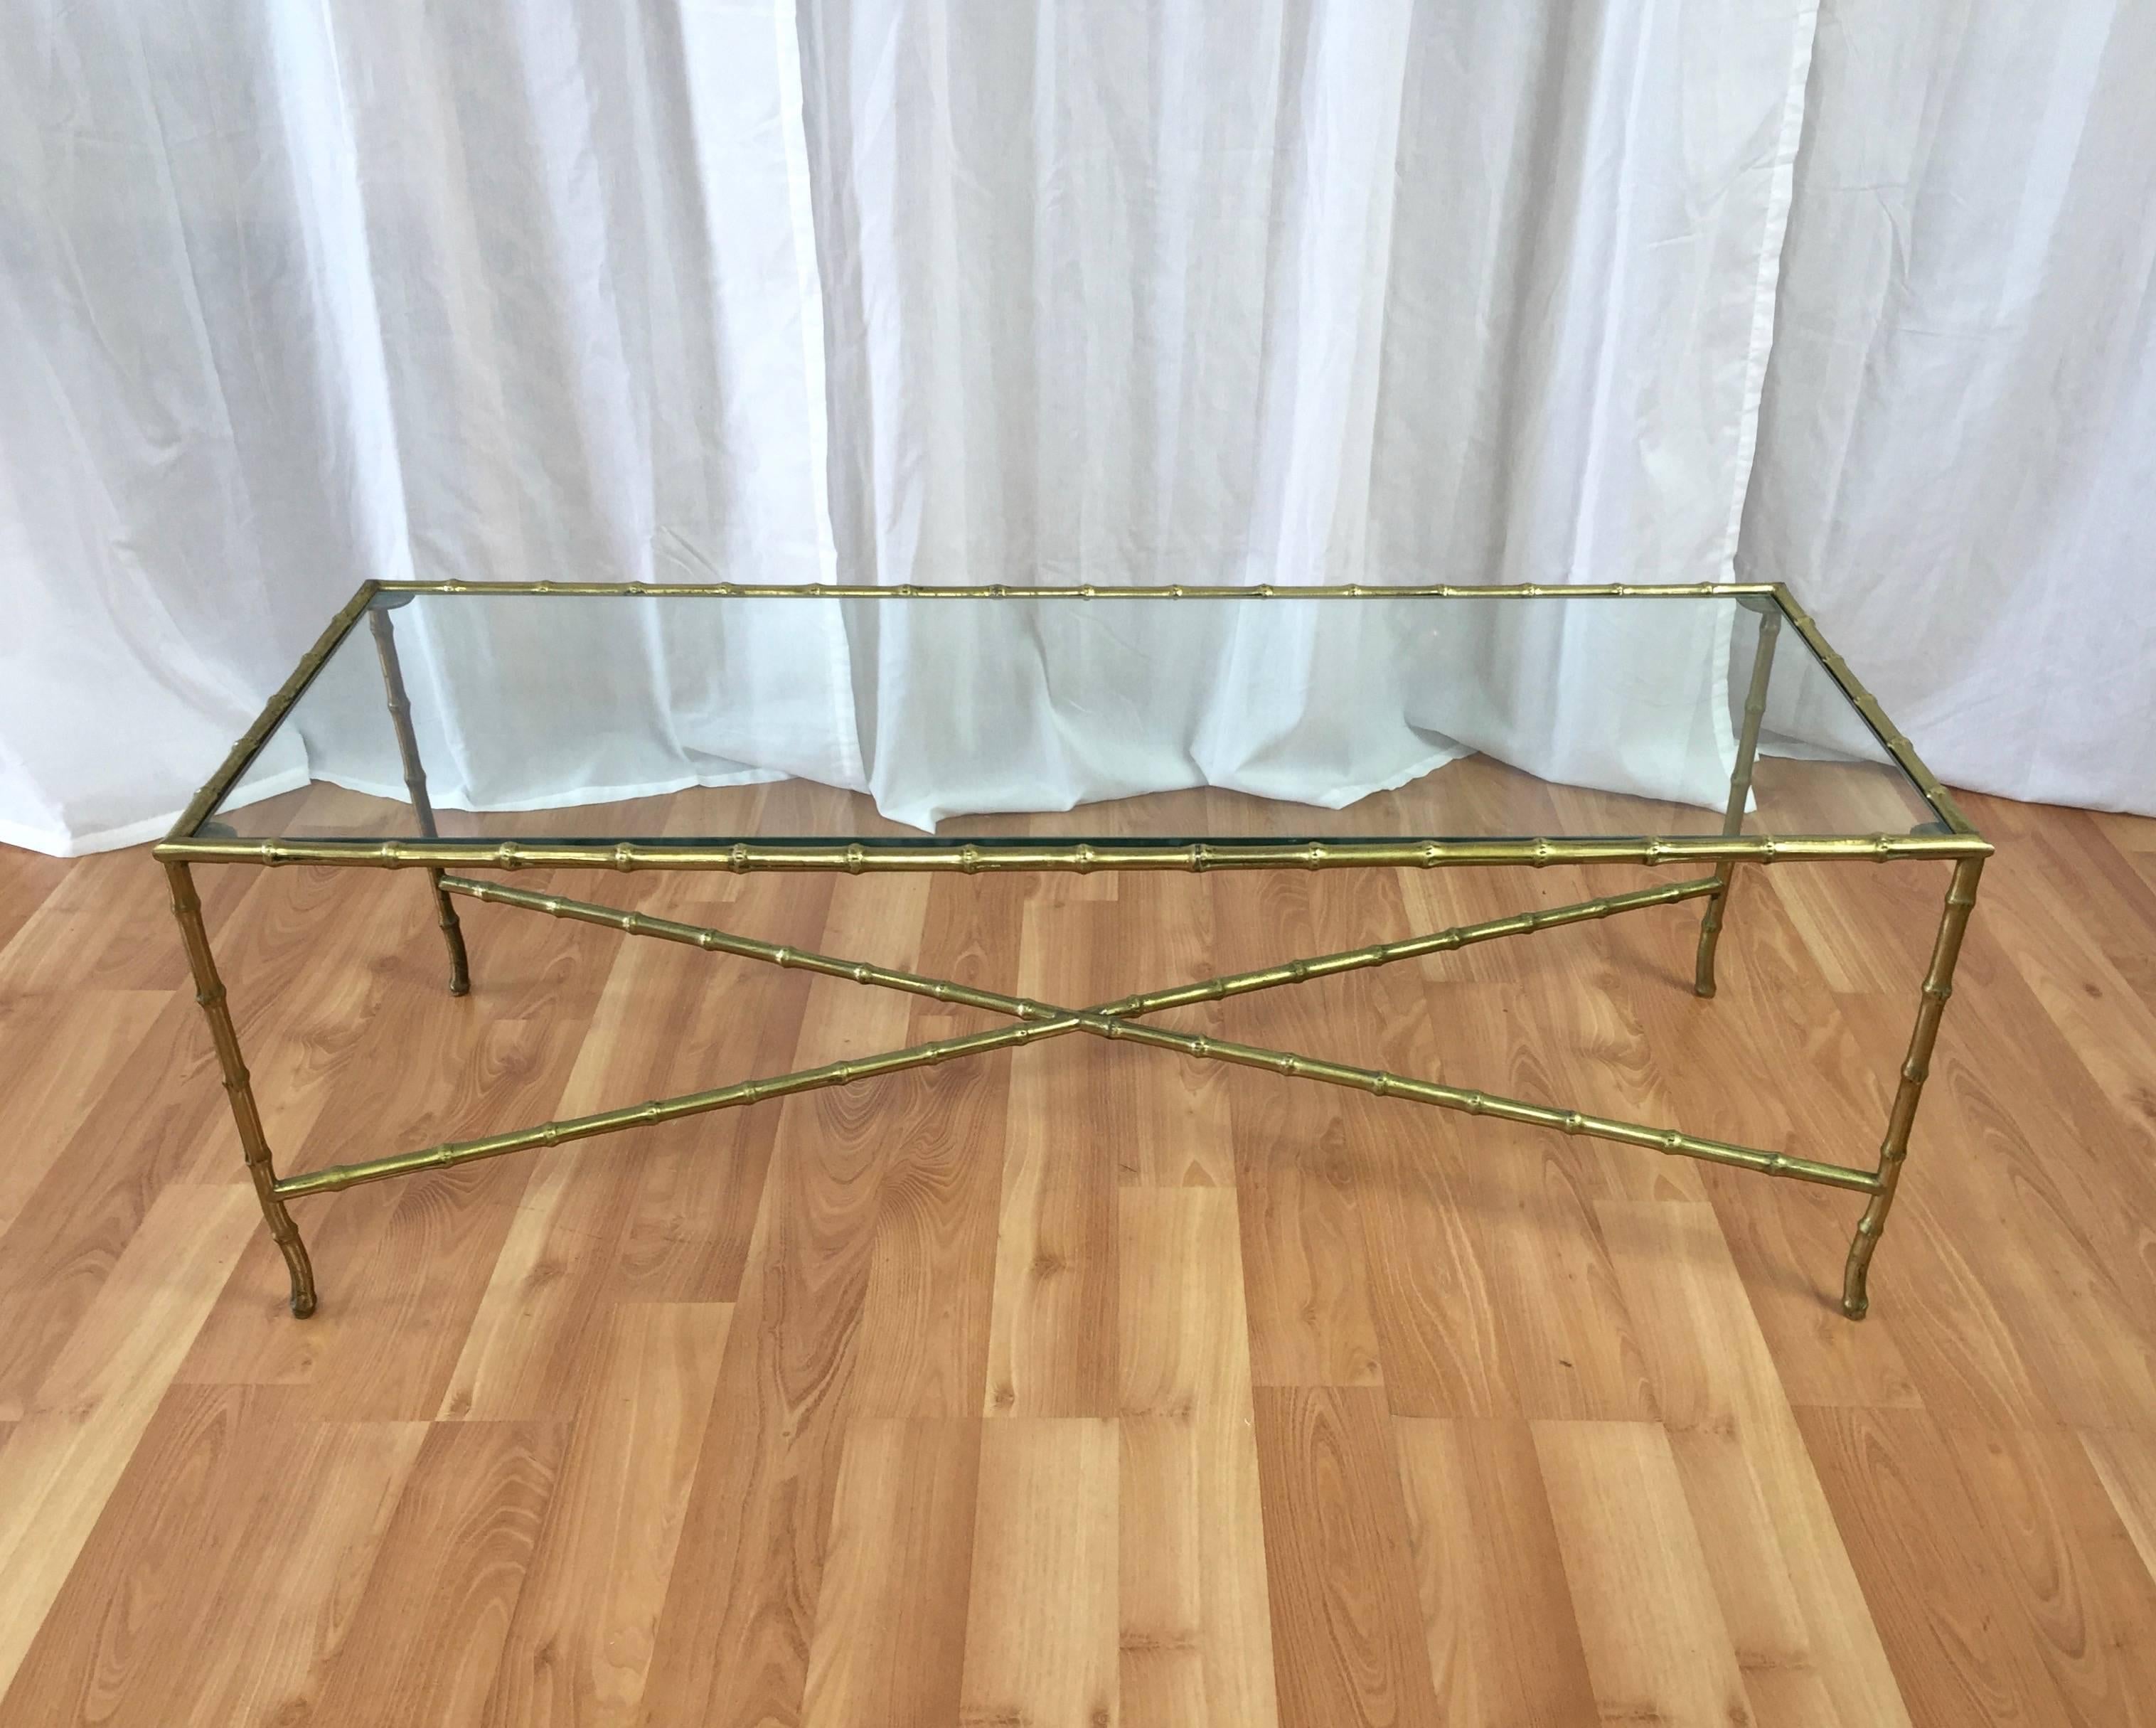 A Hollywood Regency or chinoiserie style brass and glass faux bamboo coffee table by Maison Baguès.

Very well rendered and visually light frame features elegantly curved ankles, and is grounded by an X-shaped stretcher. Brass finish is nicely